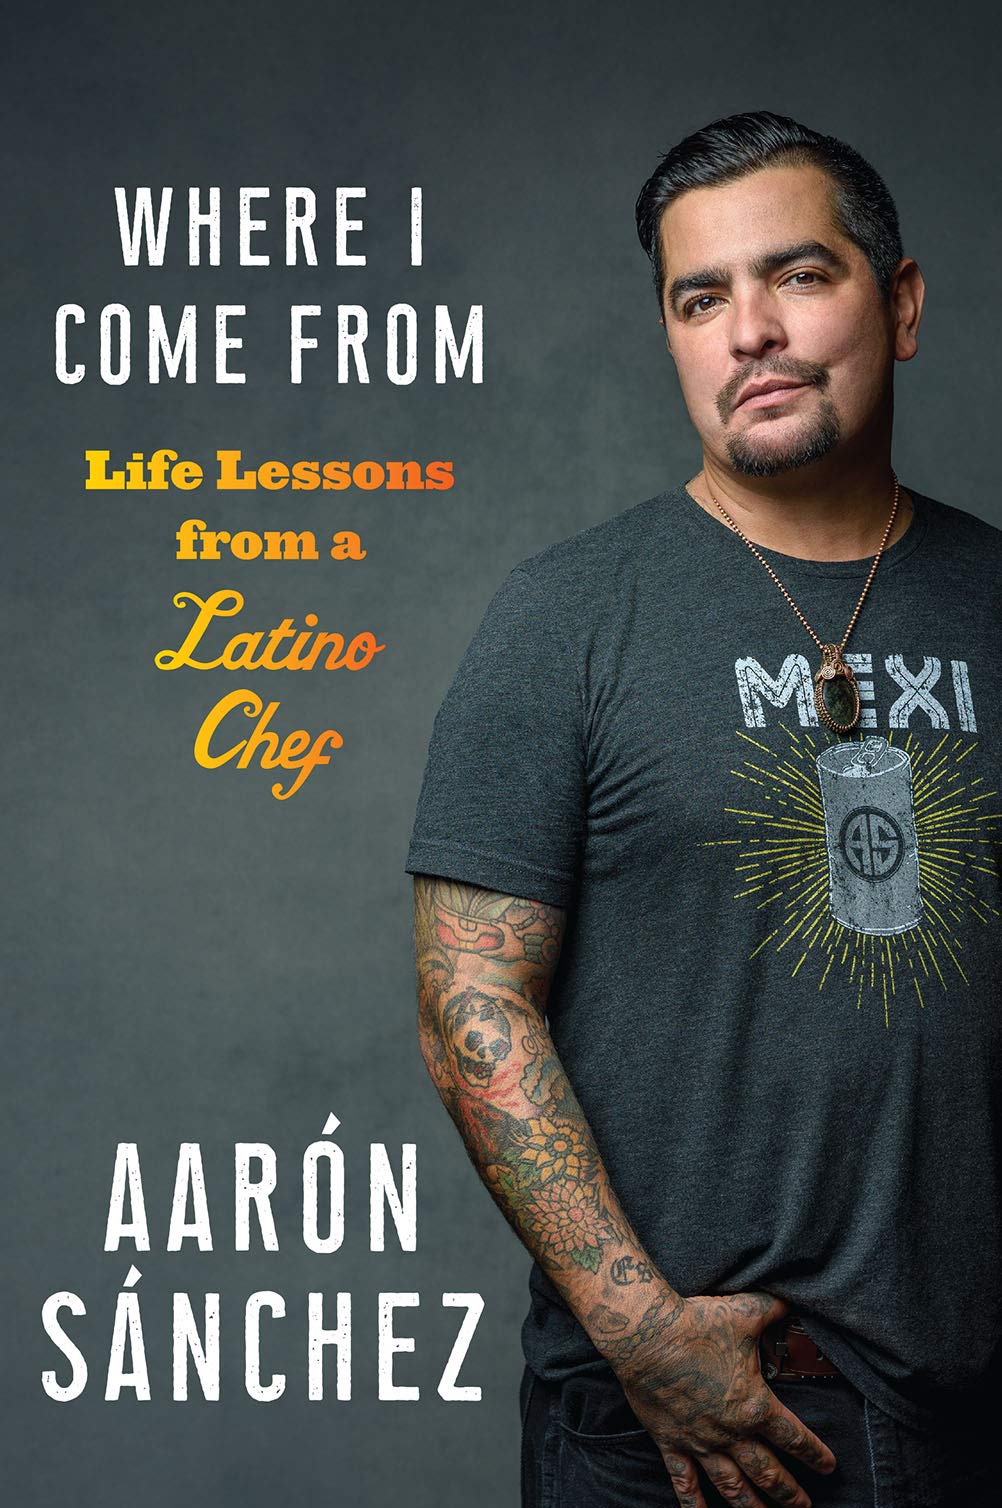 Where I Come From by Aaron Sanchez